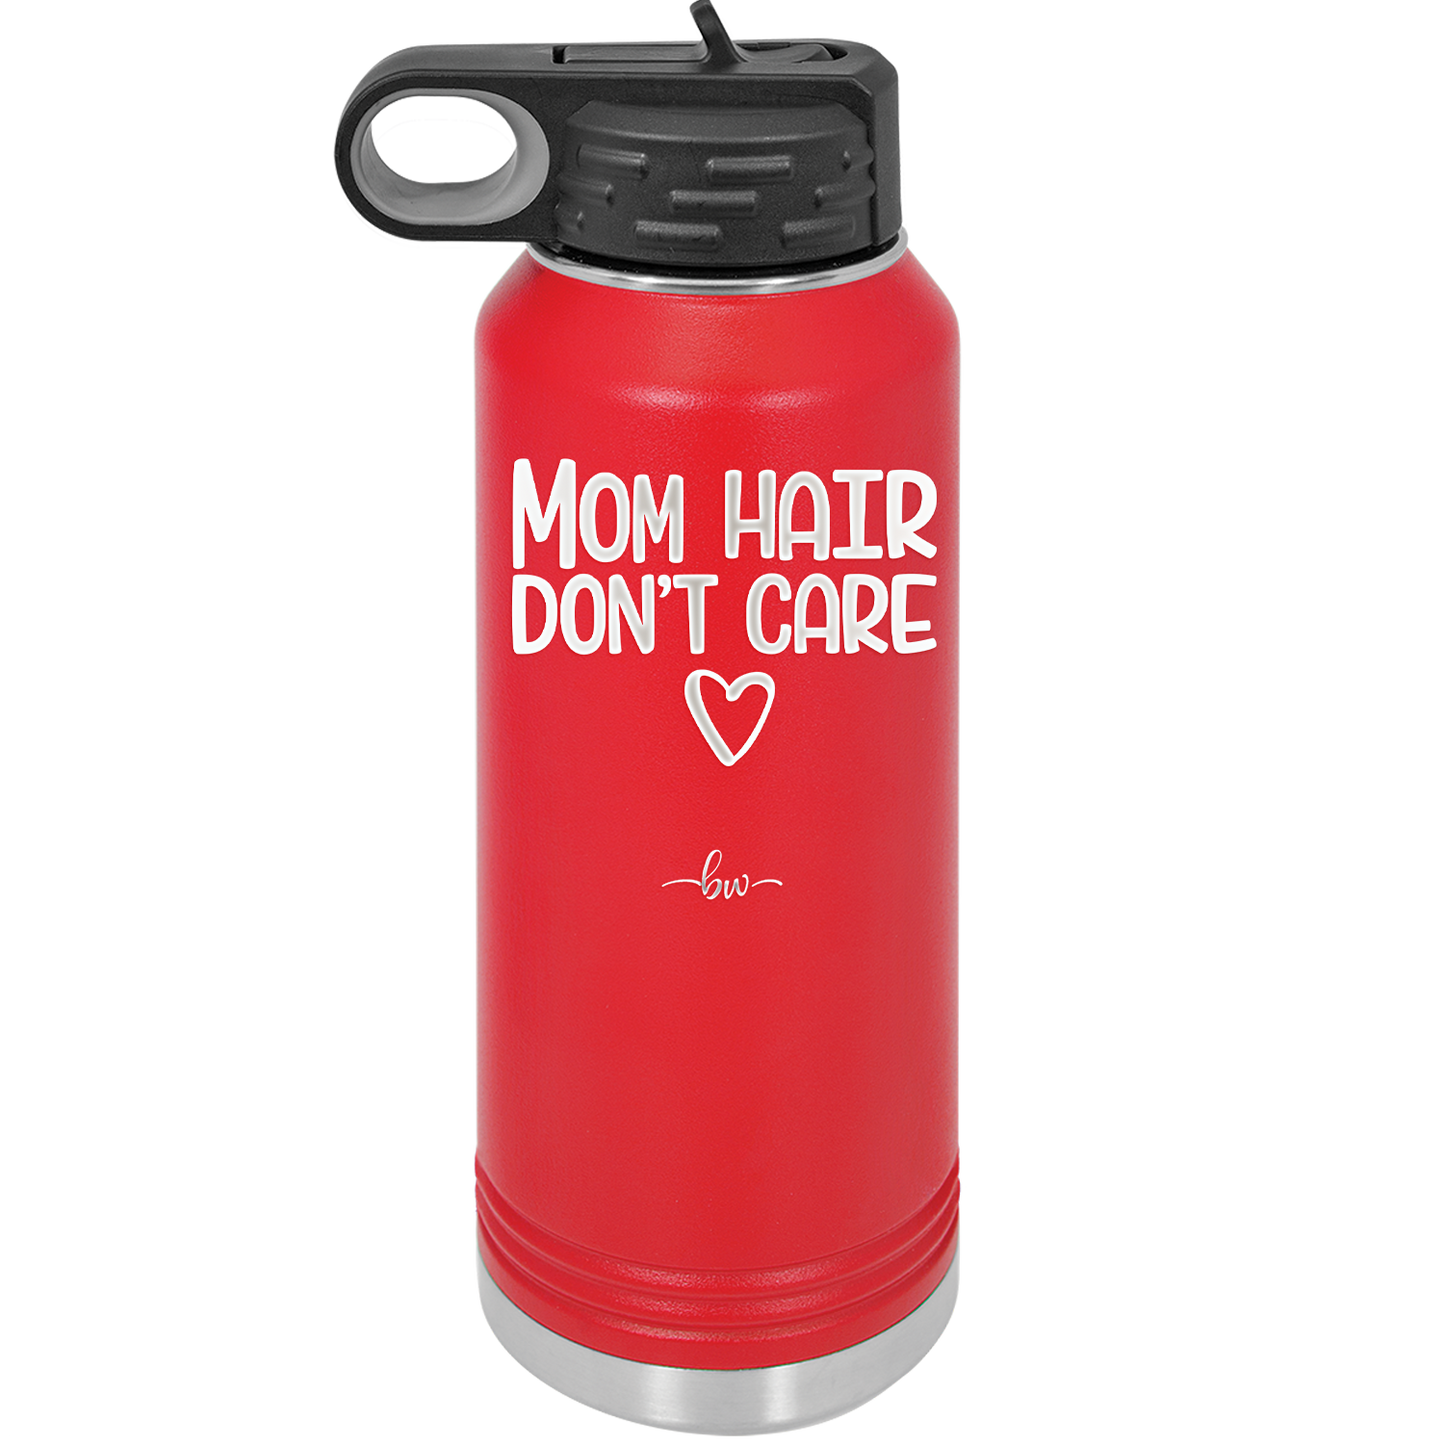 Mom Hair Don't Care - Laser Engraved Stainless Steel Drinkware - 1964 -